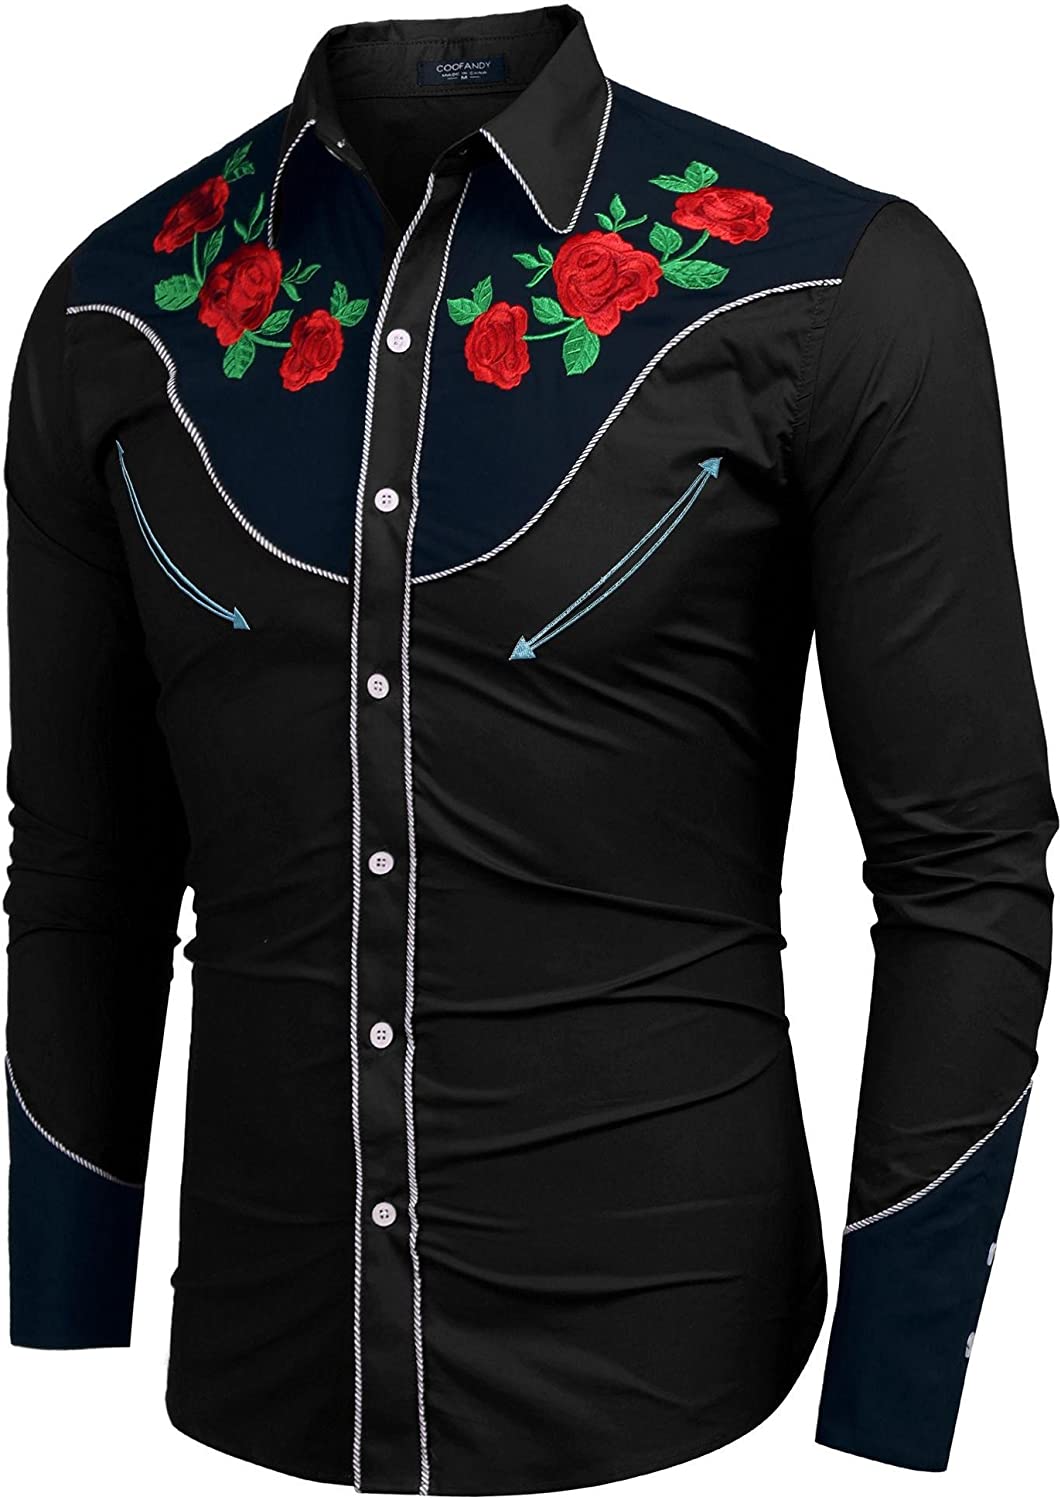 COOFANDY Men's Embroidered Rose Design Western Shirt Long Sleeve Button ...